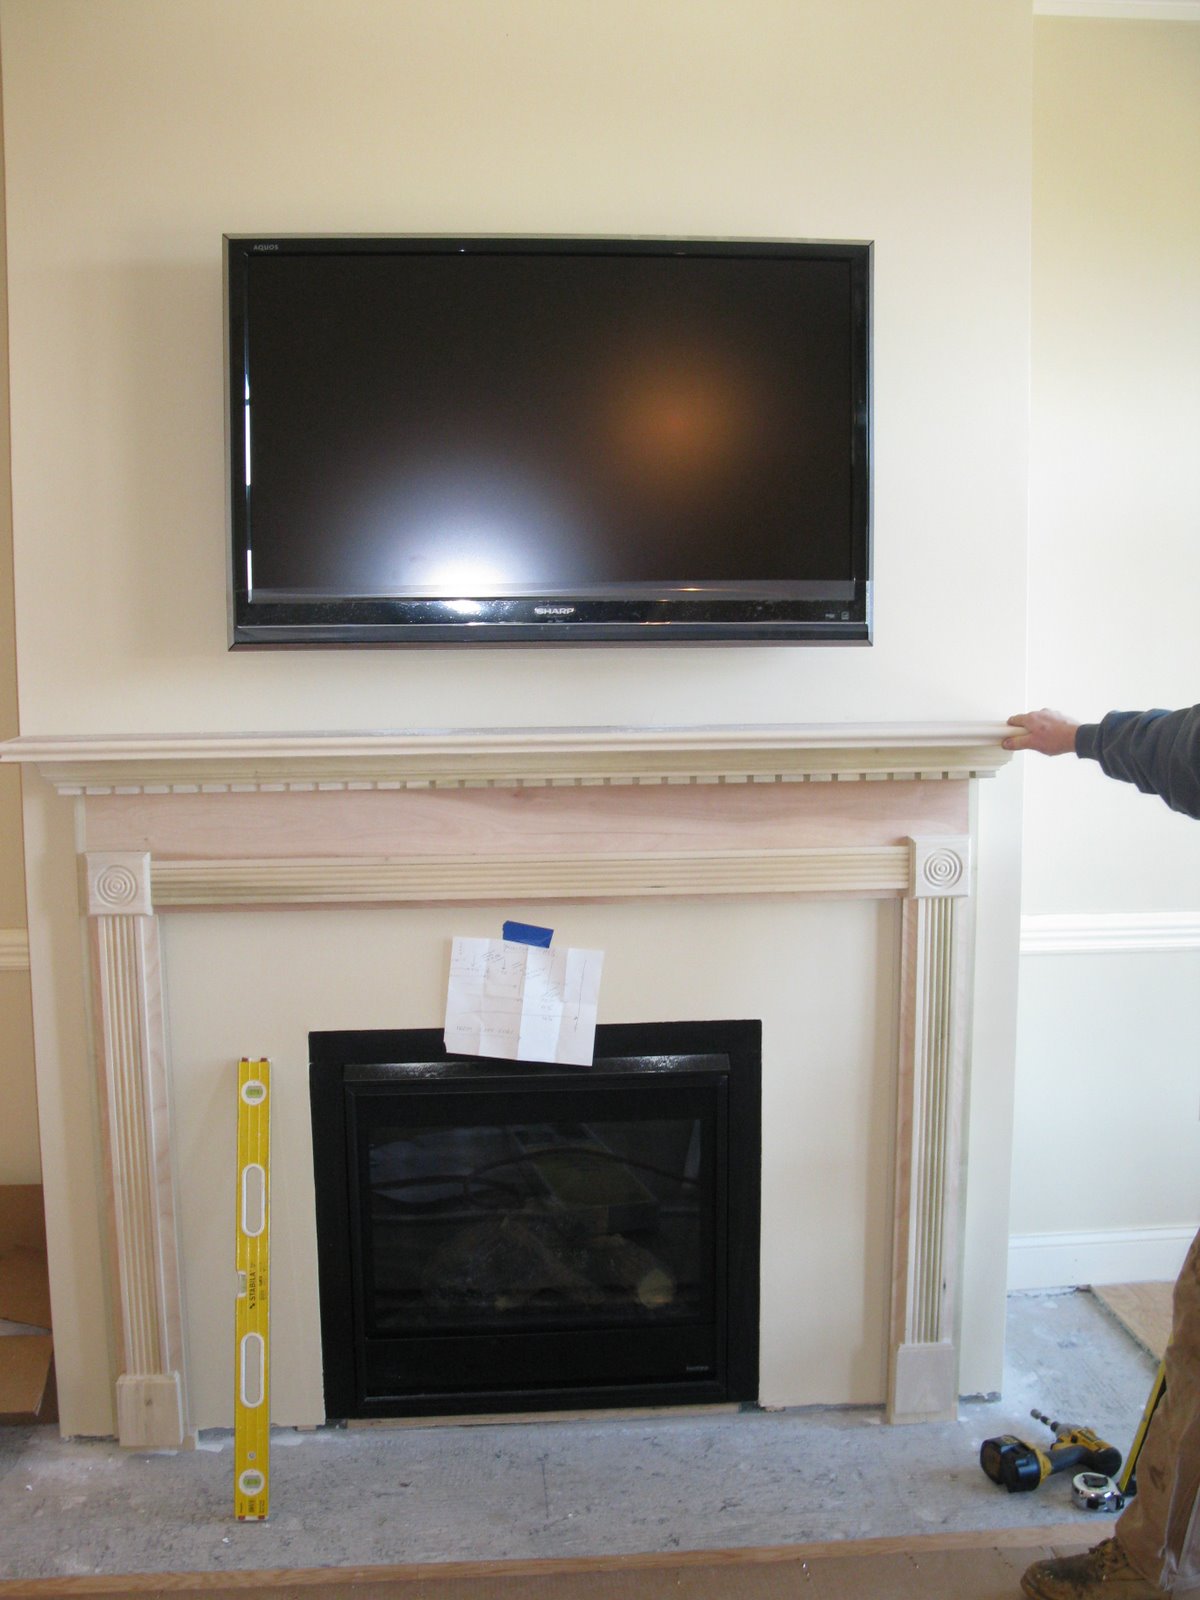 Installing A Fireplace Mantle, How To Build A Mantel Around Gas Fireplace